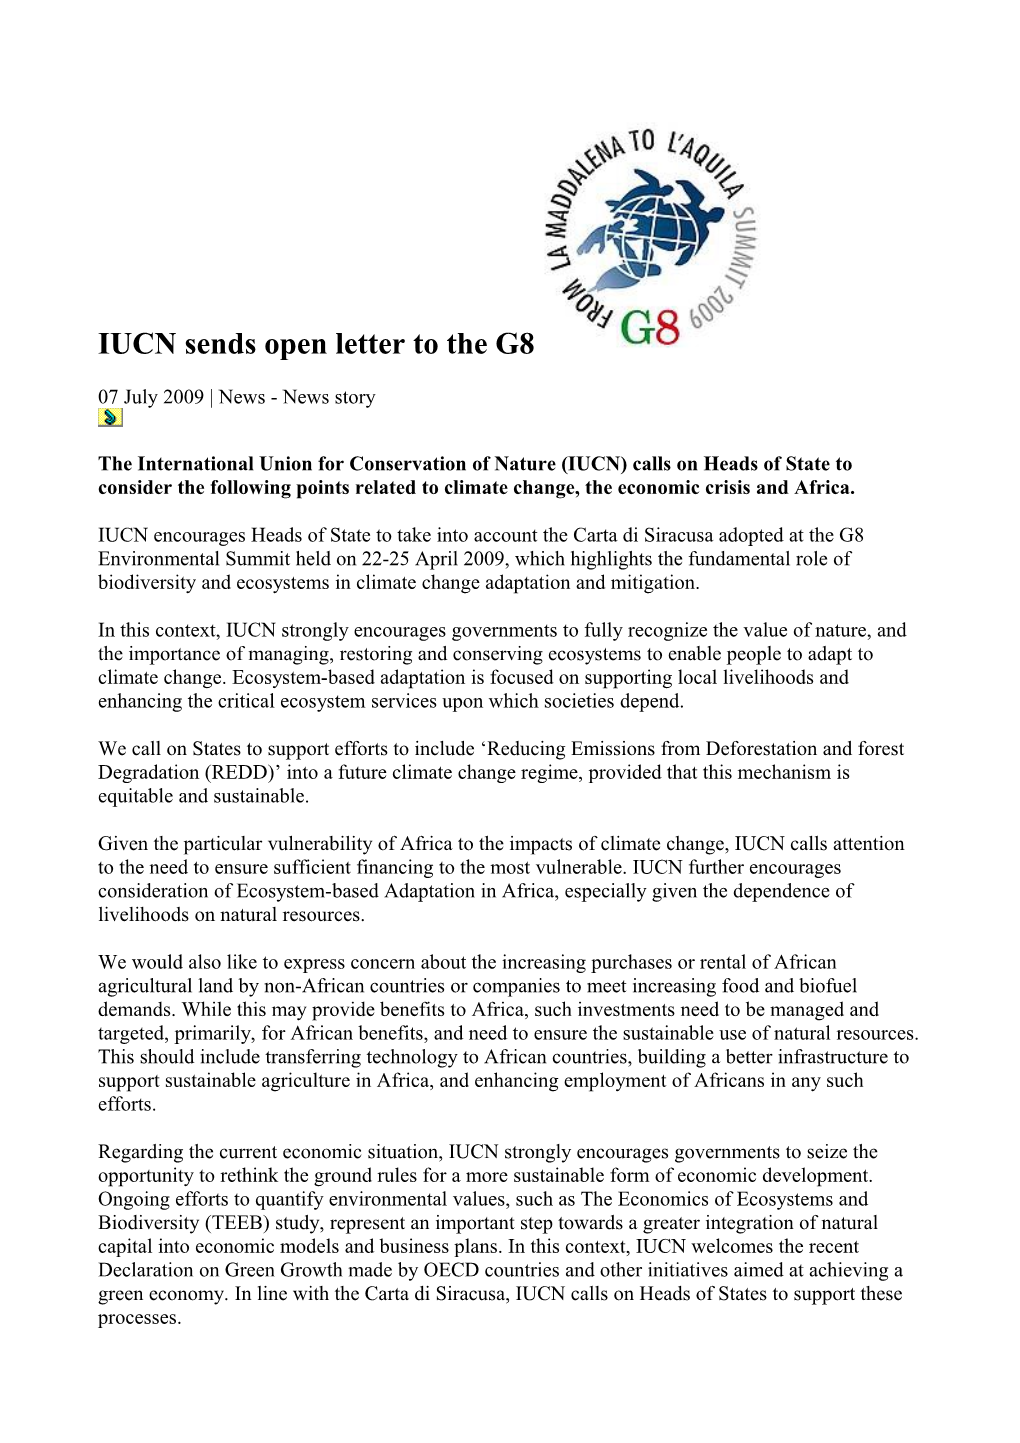 IUCN Sends Open Letter to the G8